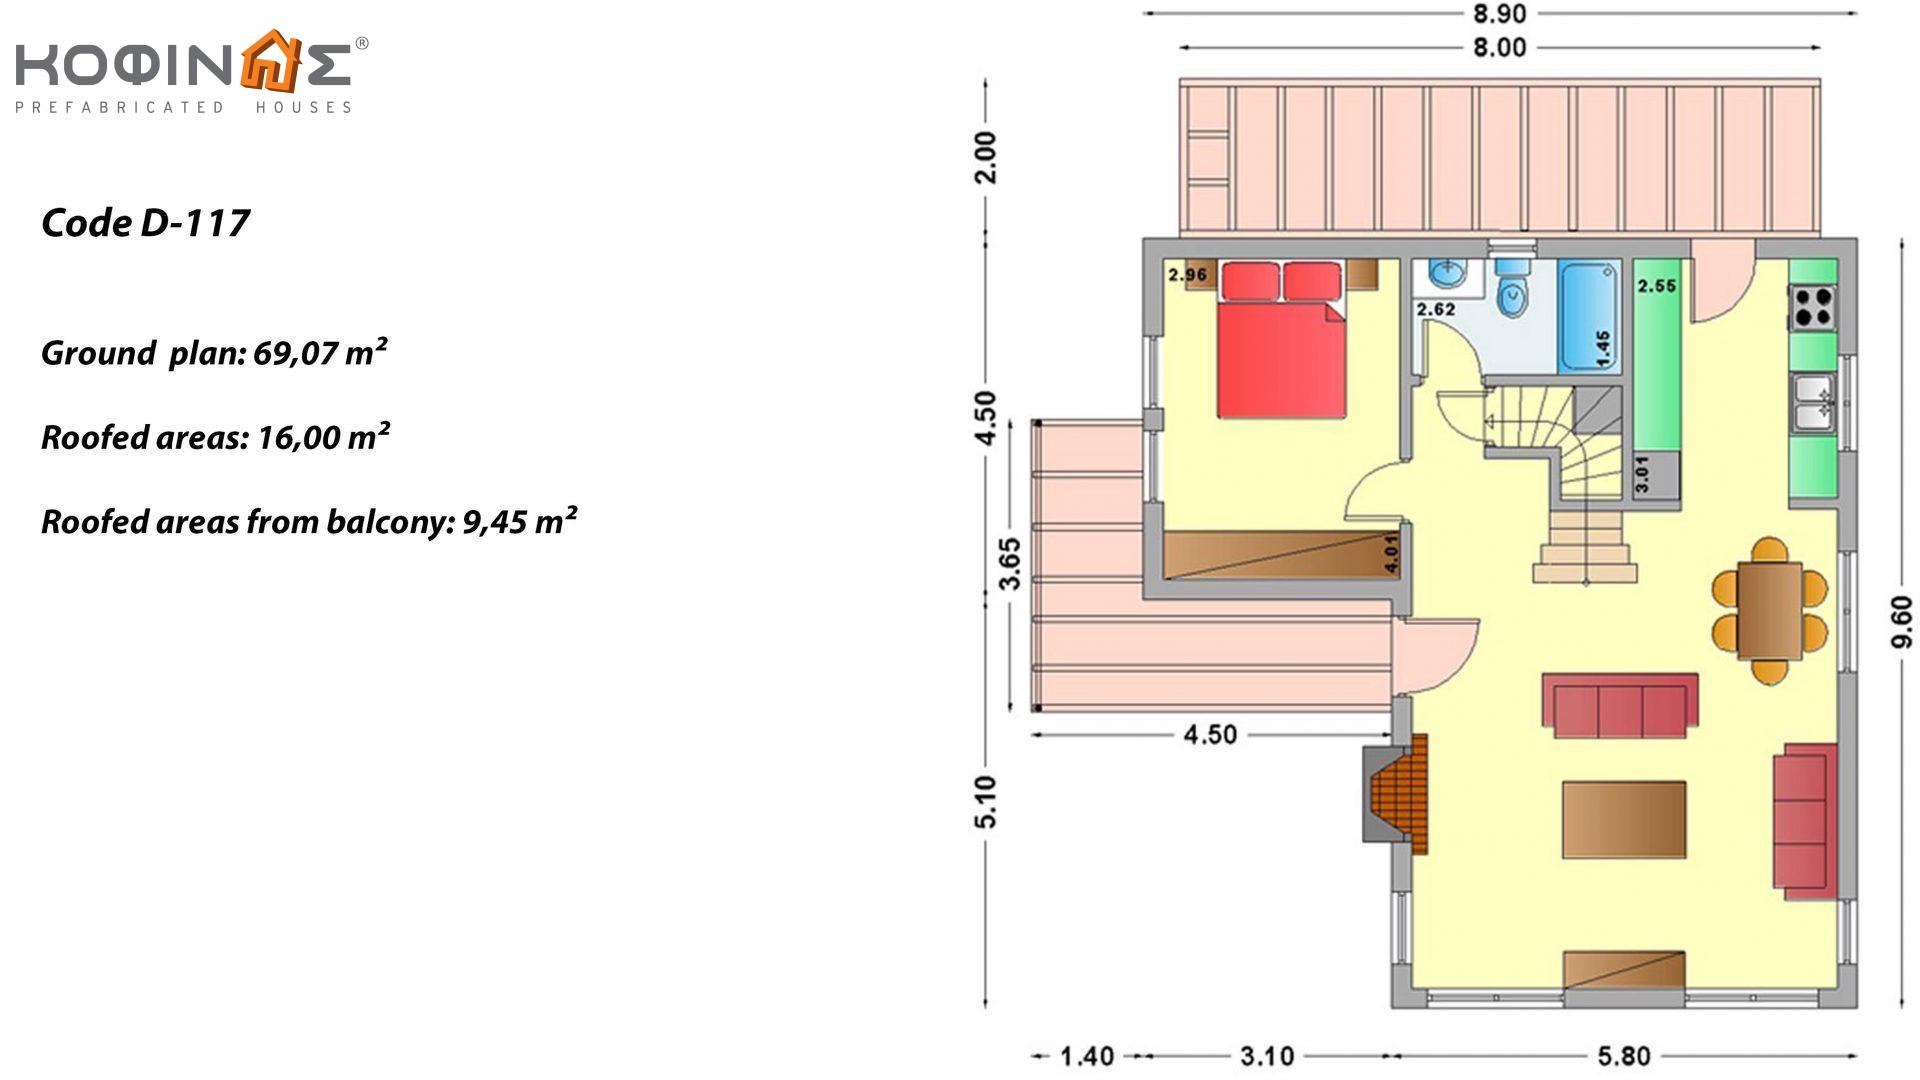 2-story house D-117, total surface of 117,20 m²,covered roofed areas 25,45 m²,balconies 9,38 m²